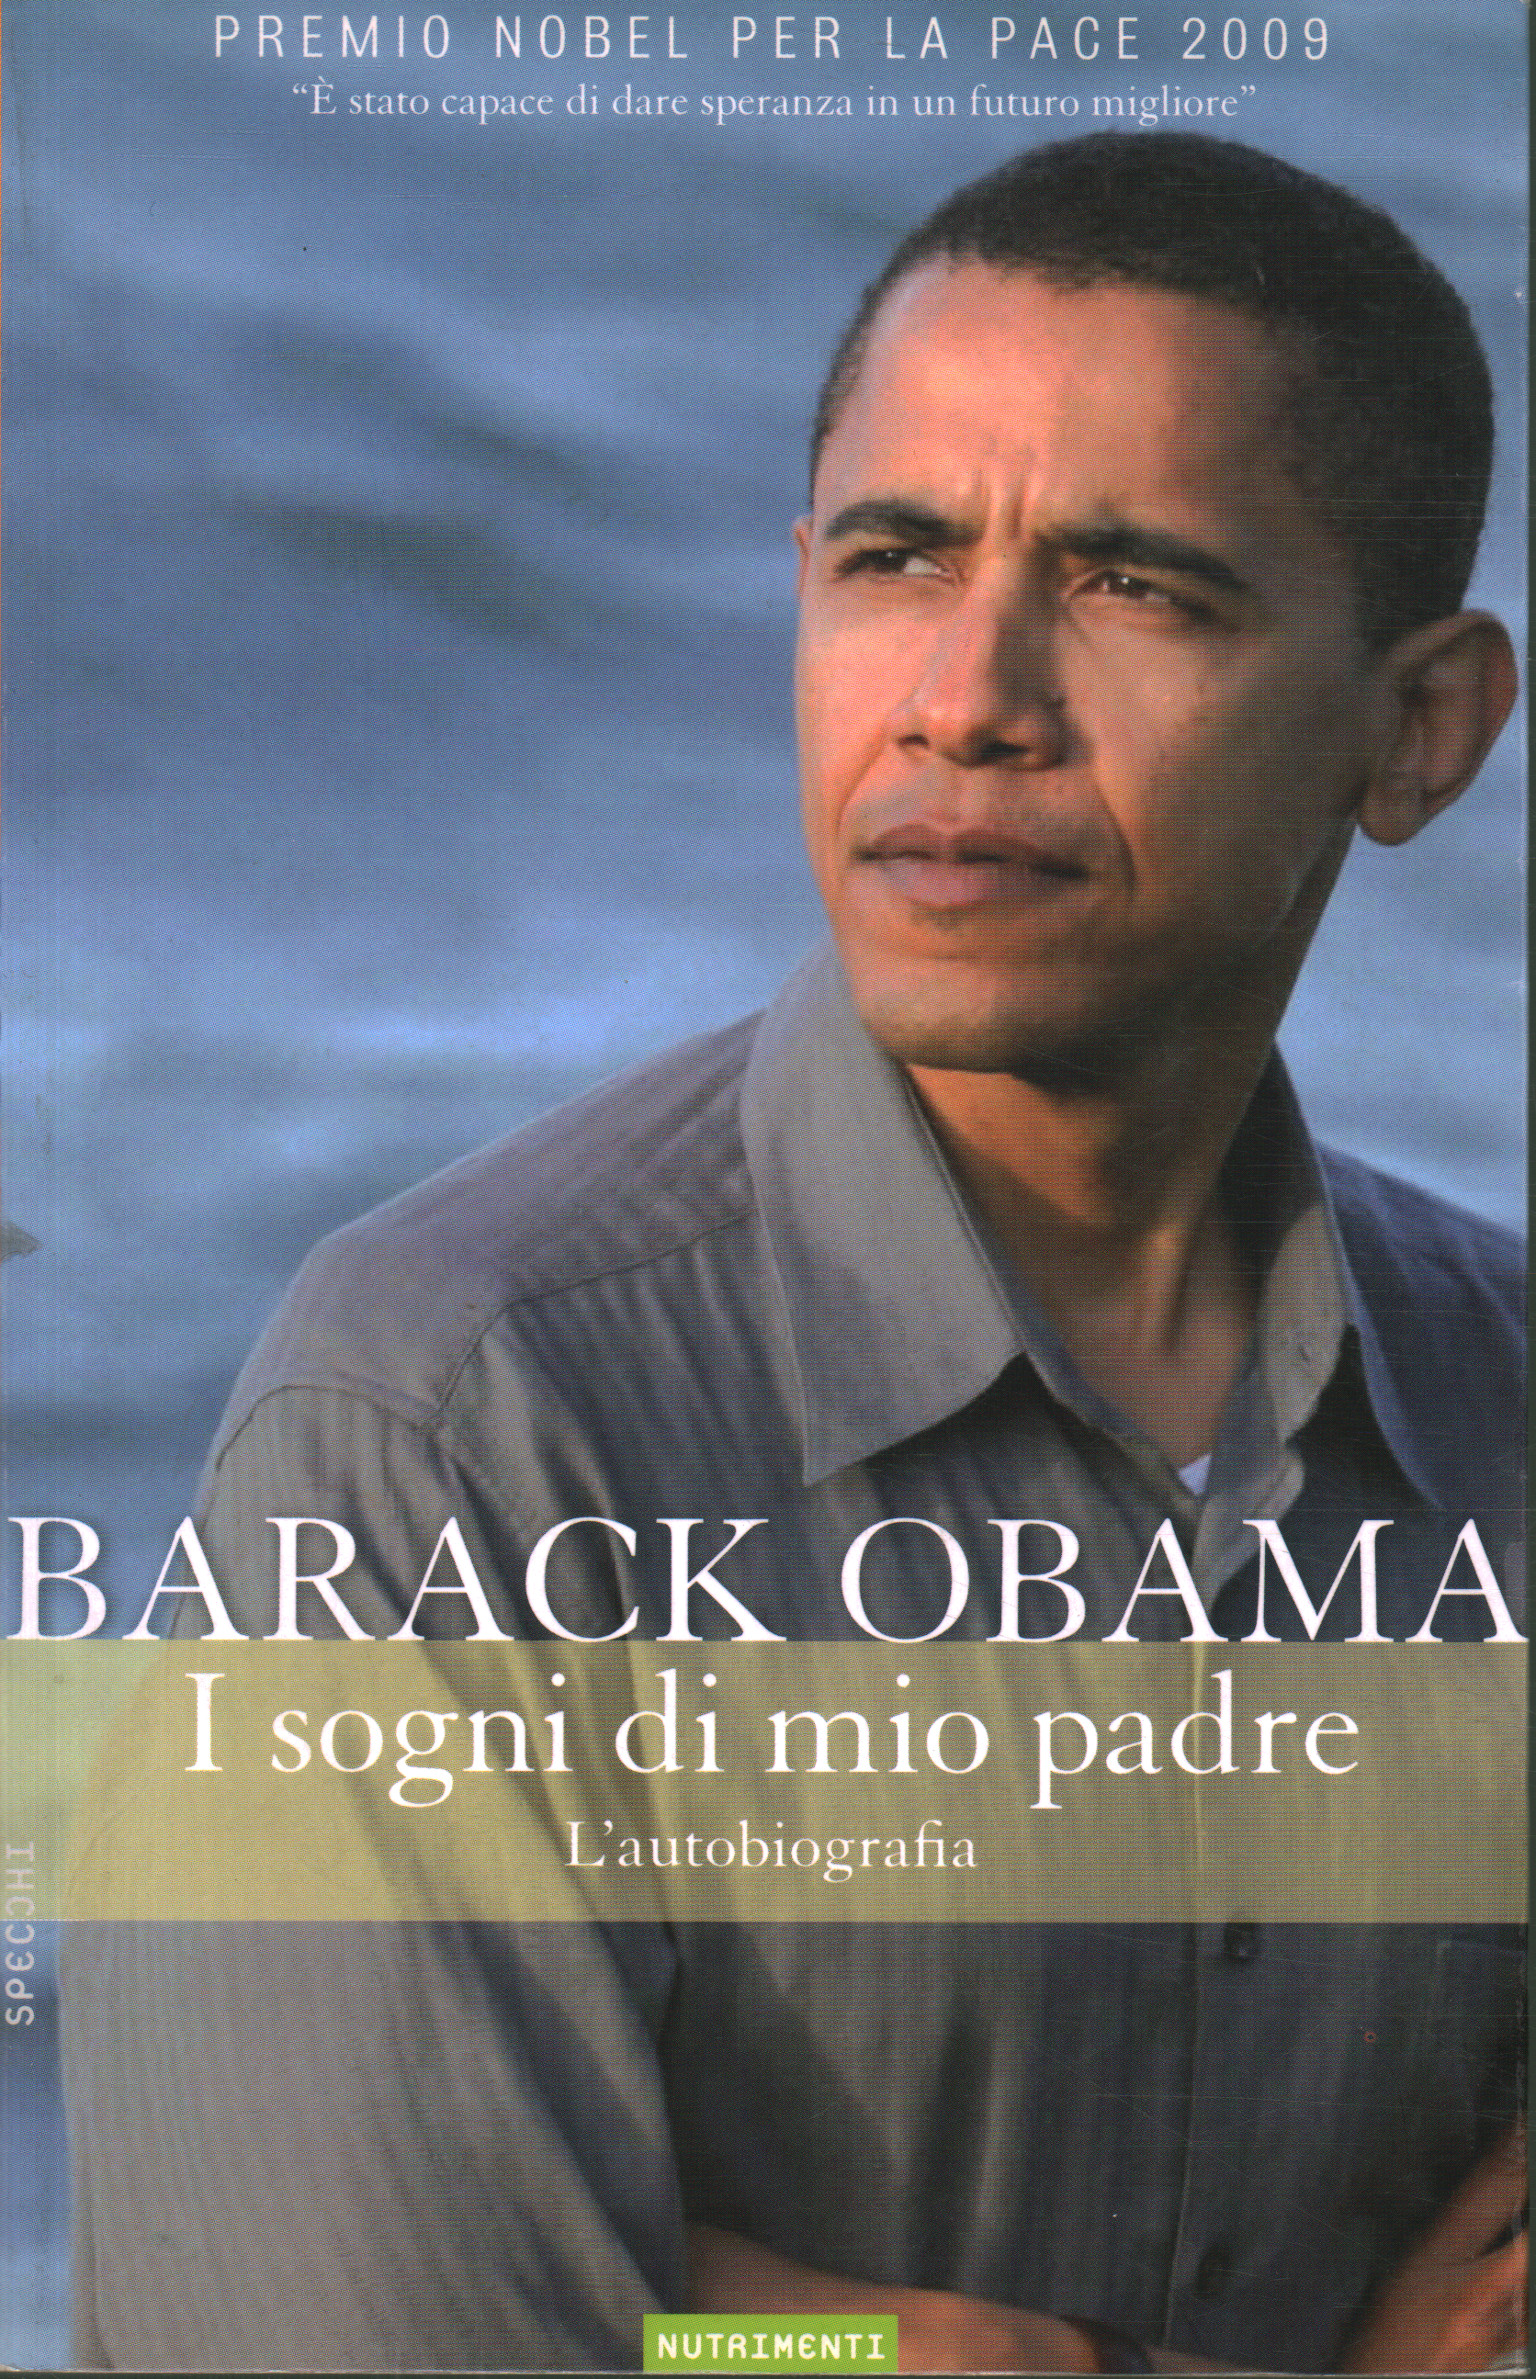 The dreams of my father, Barack Obama